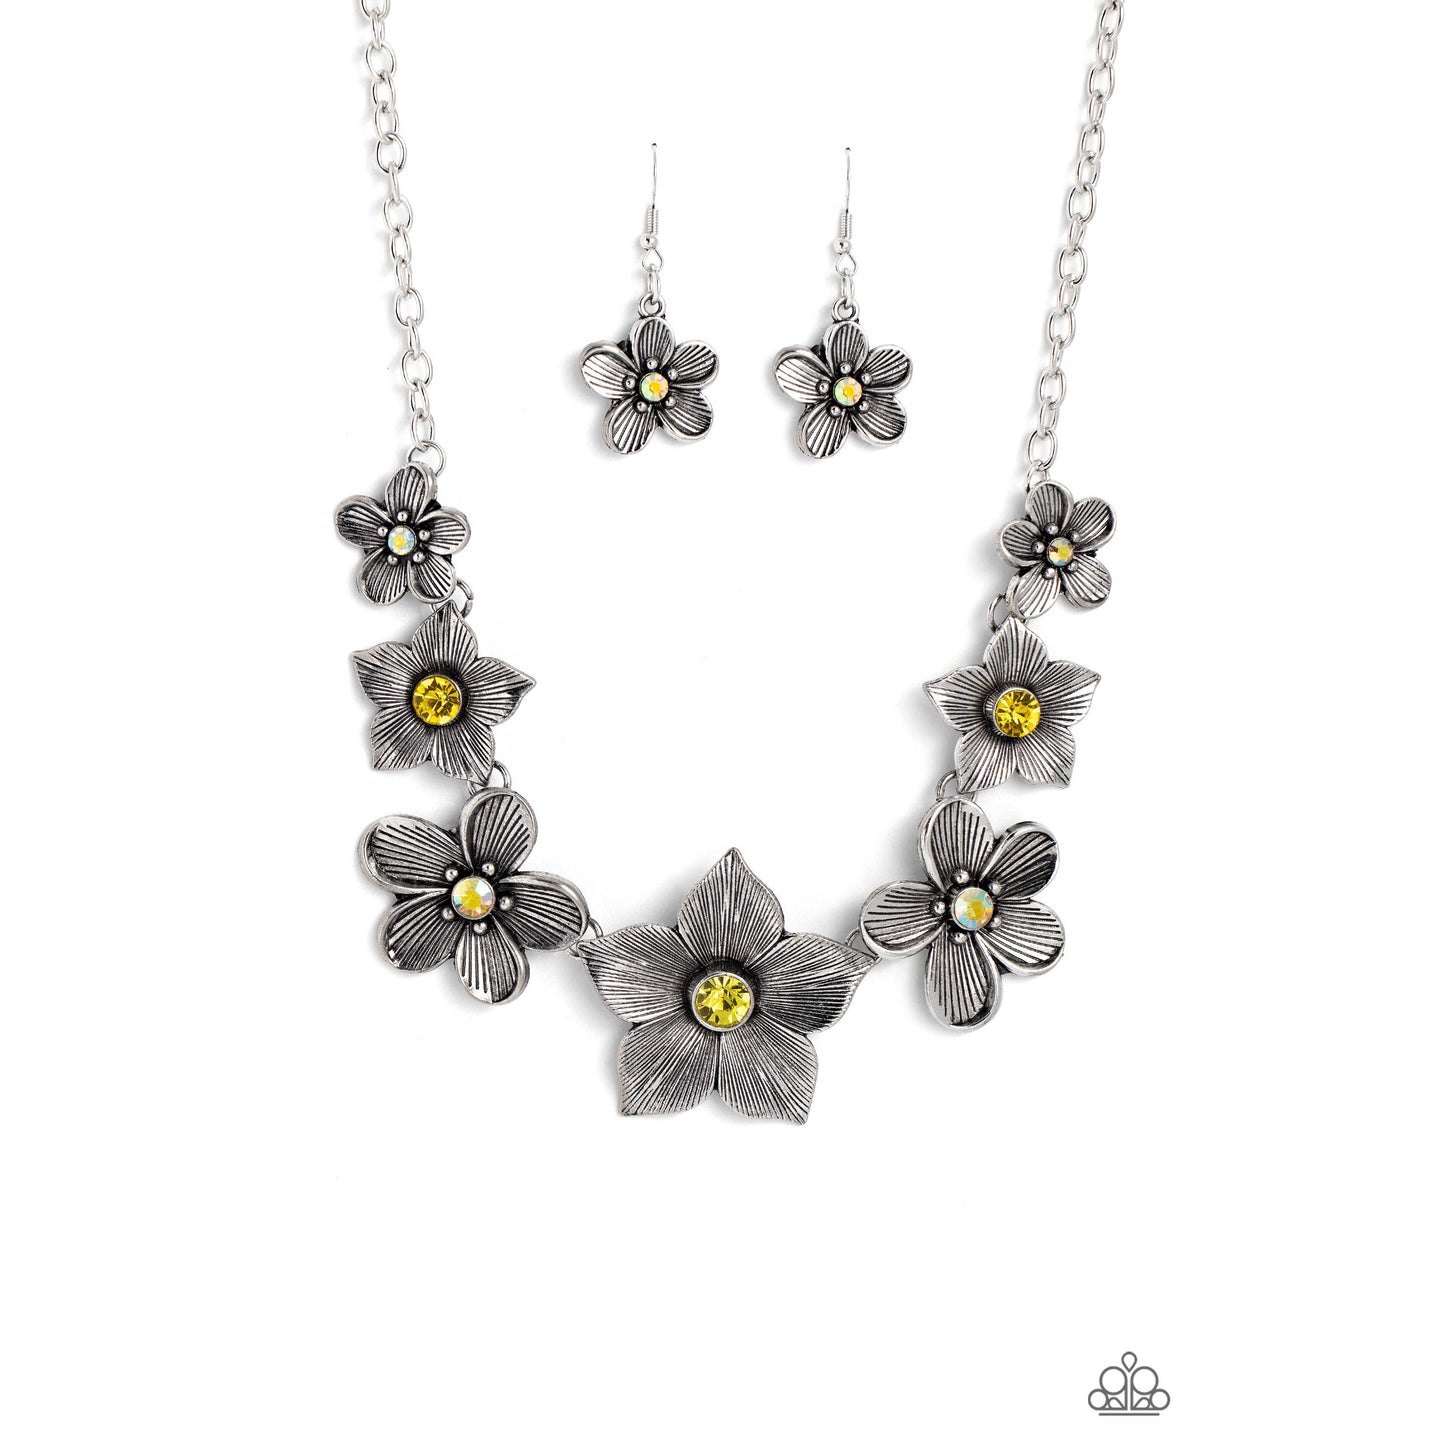 Free FLORAL - Yellow Flower Necklace - Bling by Danielle Baker